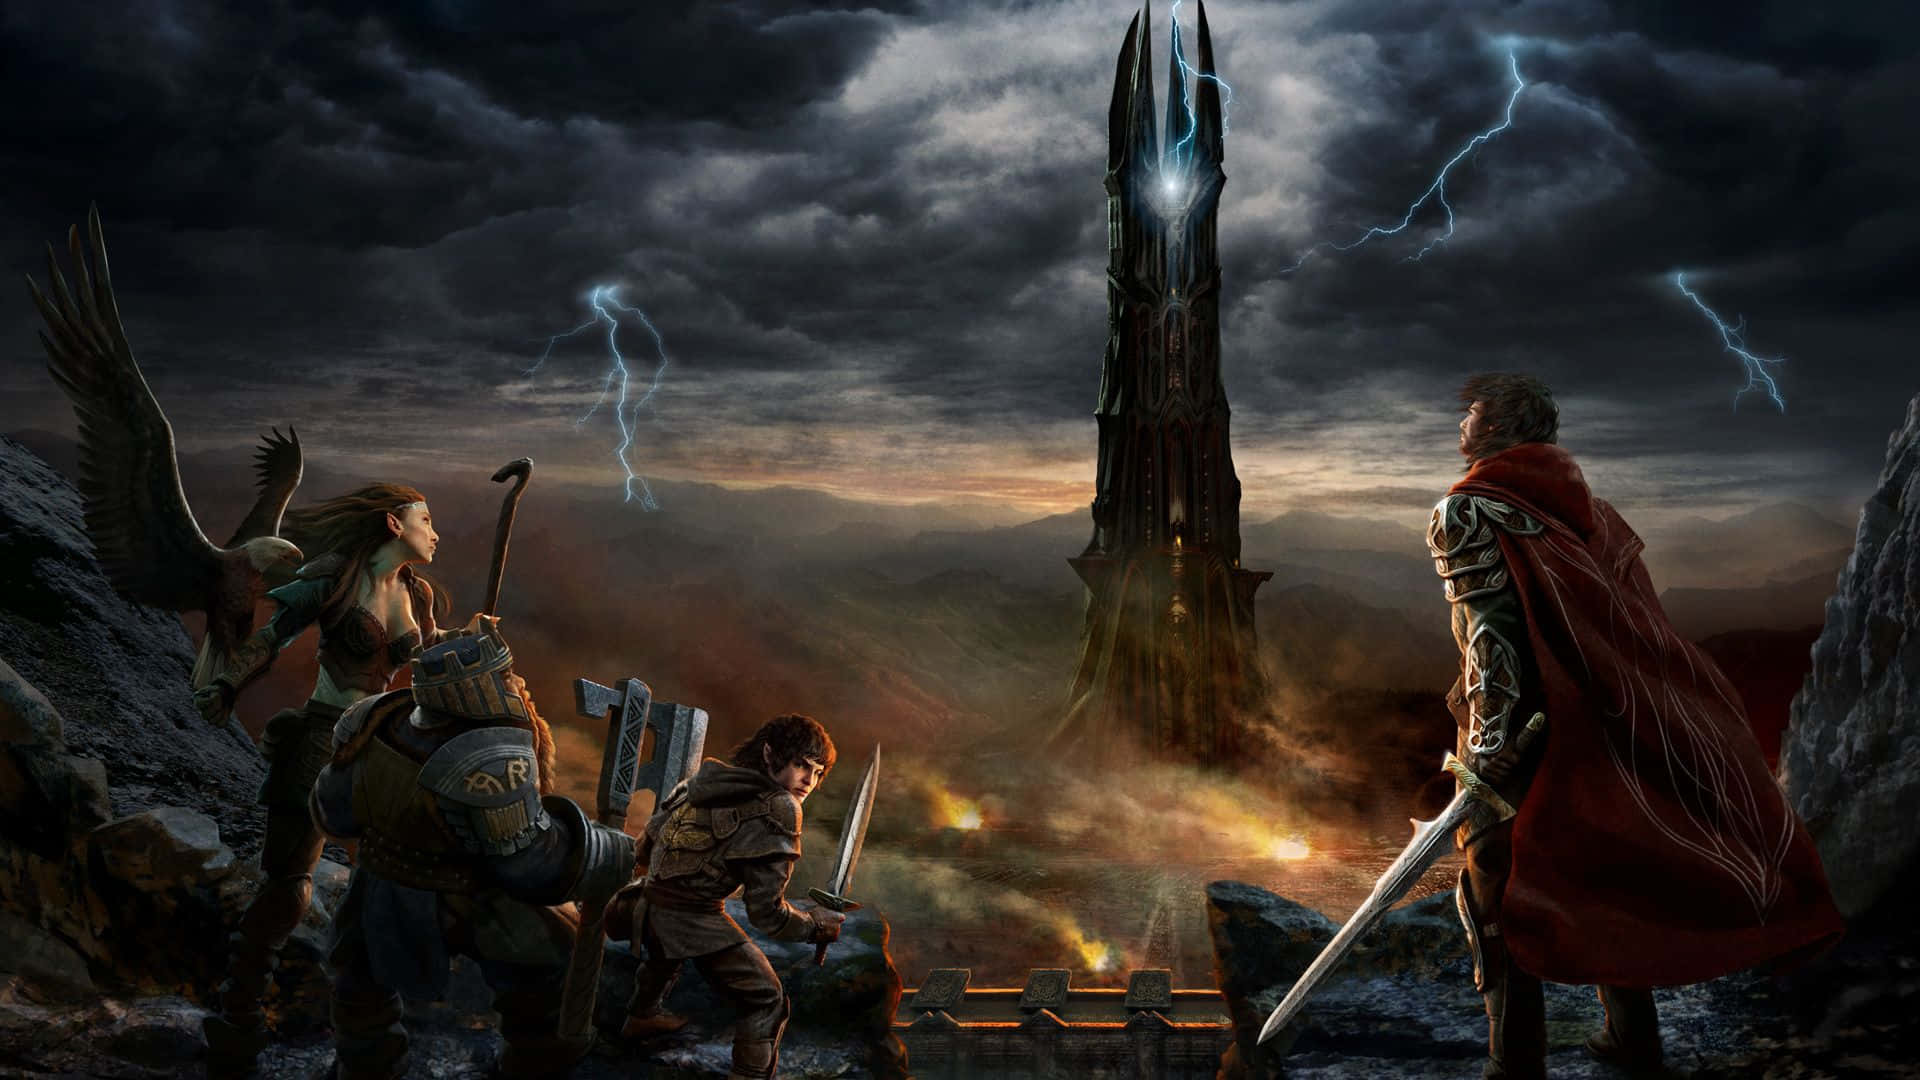 Epic Battle in Middle-Earth